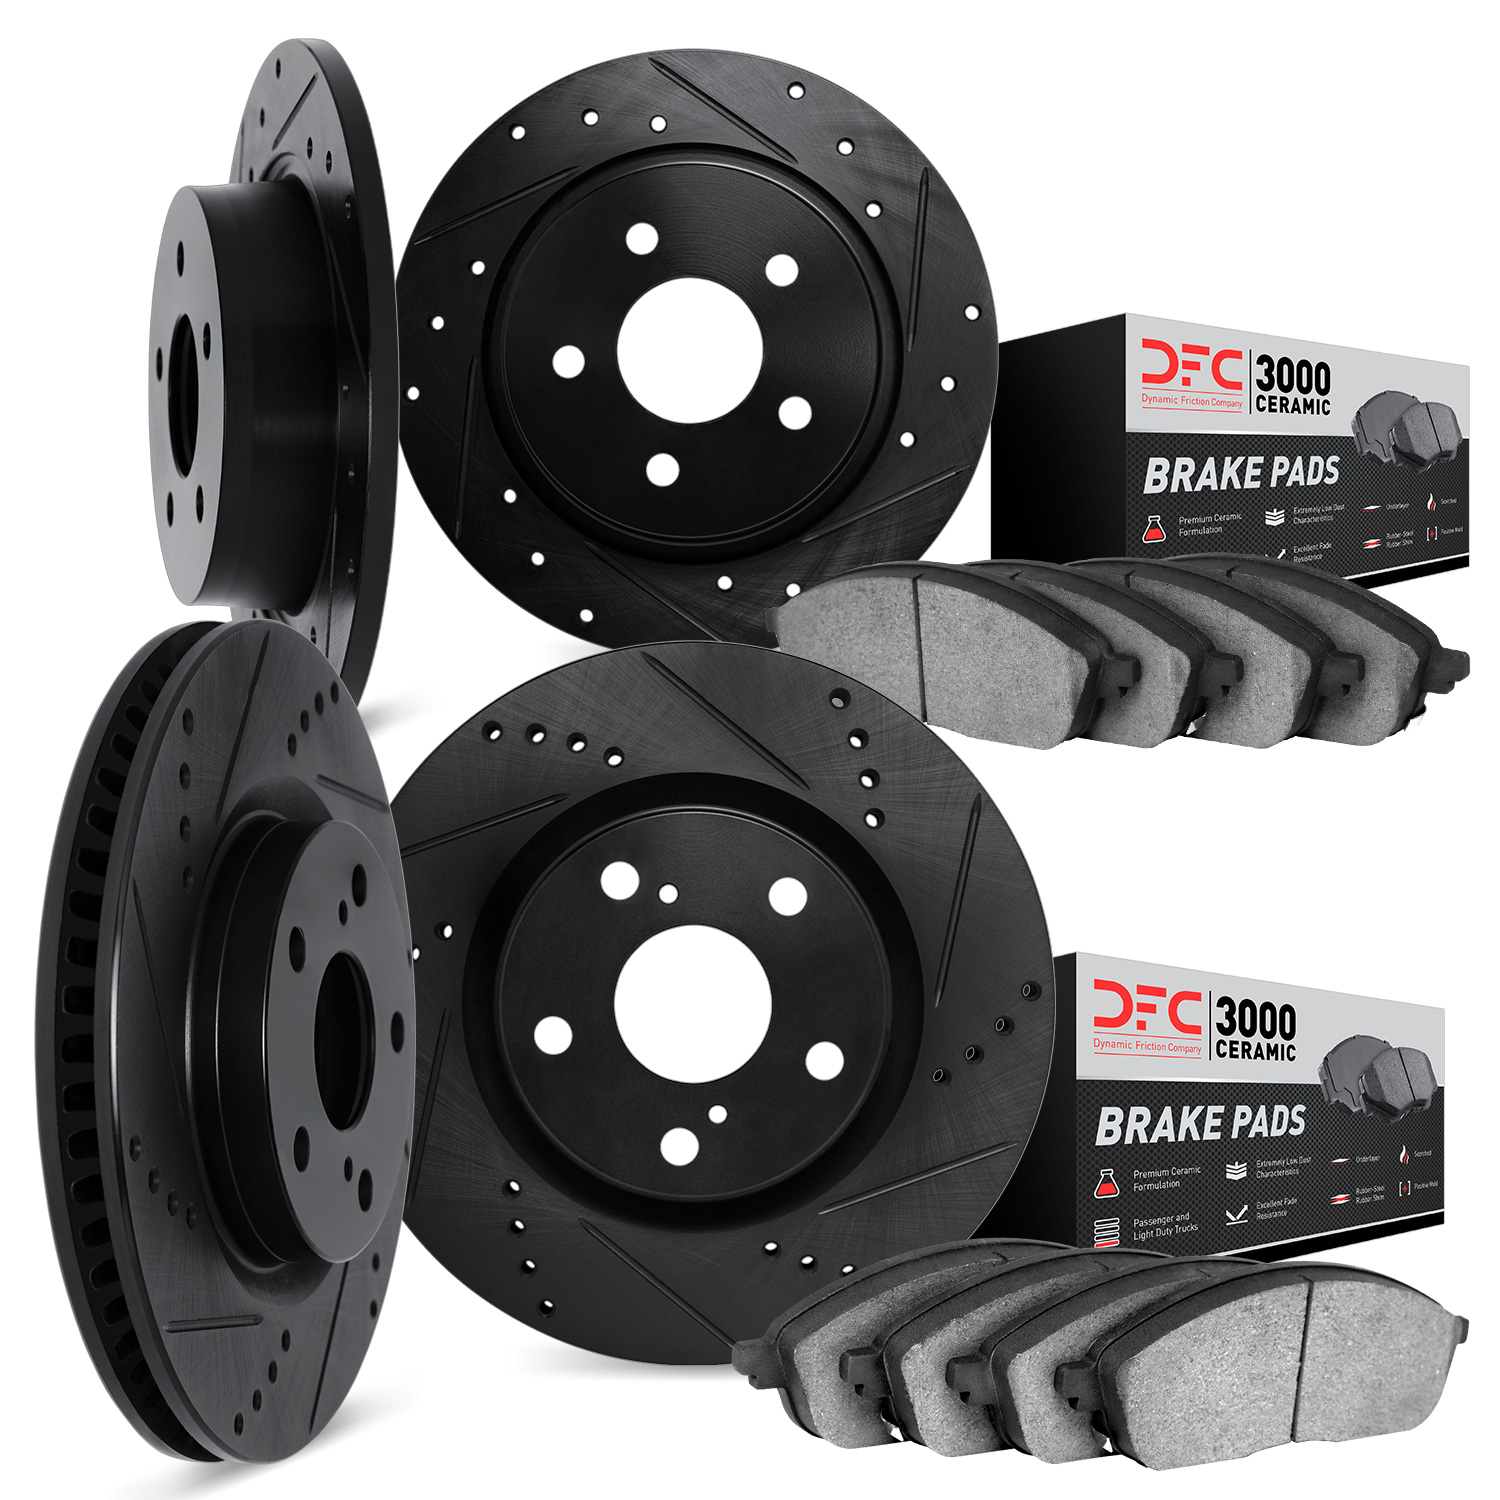 8304-63075 Drilled/Slotted Brake Rotors with 3000-Series Ceramic Brake Pads Kit [Black], 1998-2003 Mercedes-Benz, Position: Fron